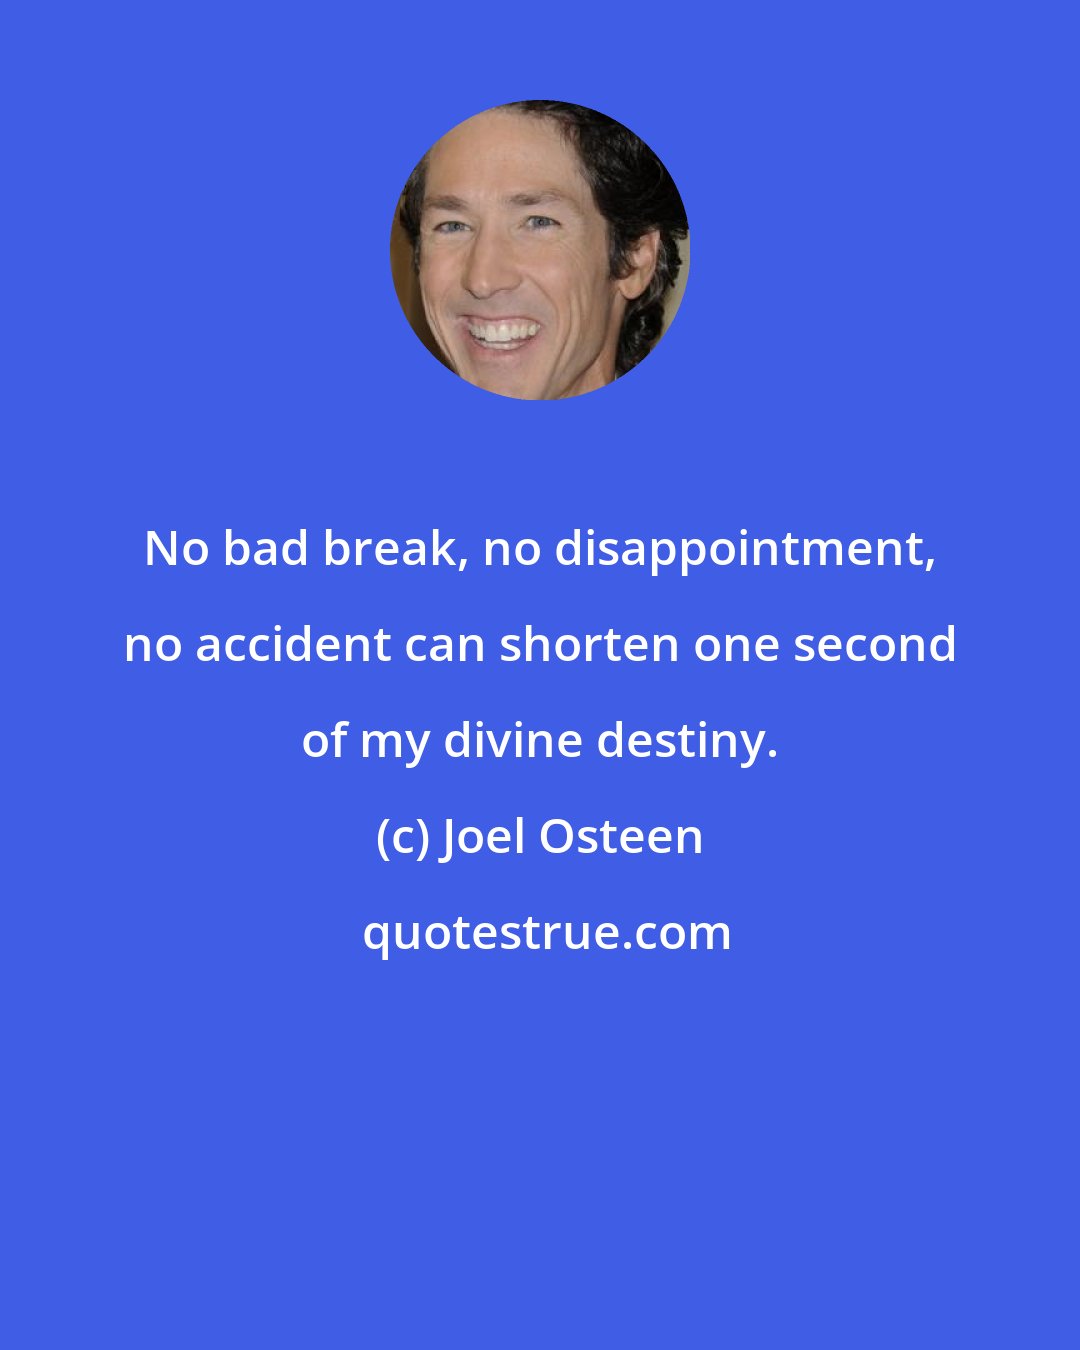 Joel Osteen: No bad break, no disappointment, no accident can shorten one second of my divine destiny.